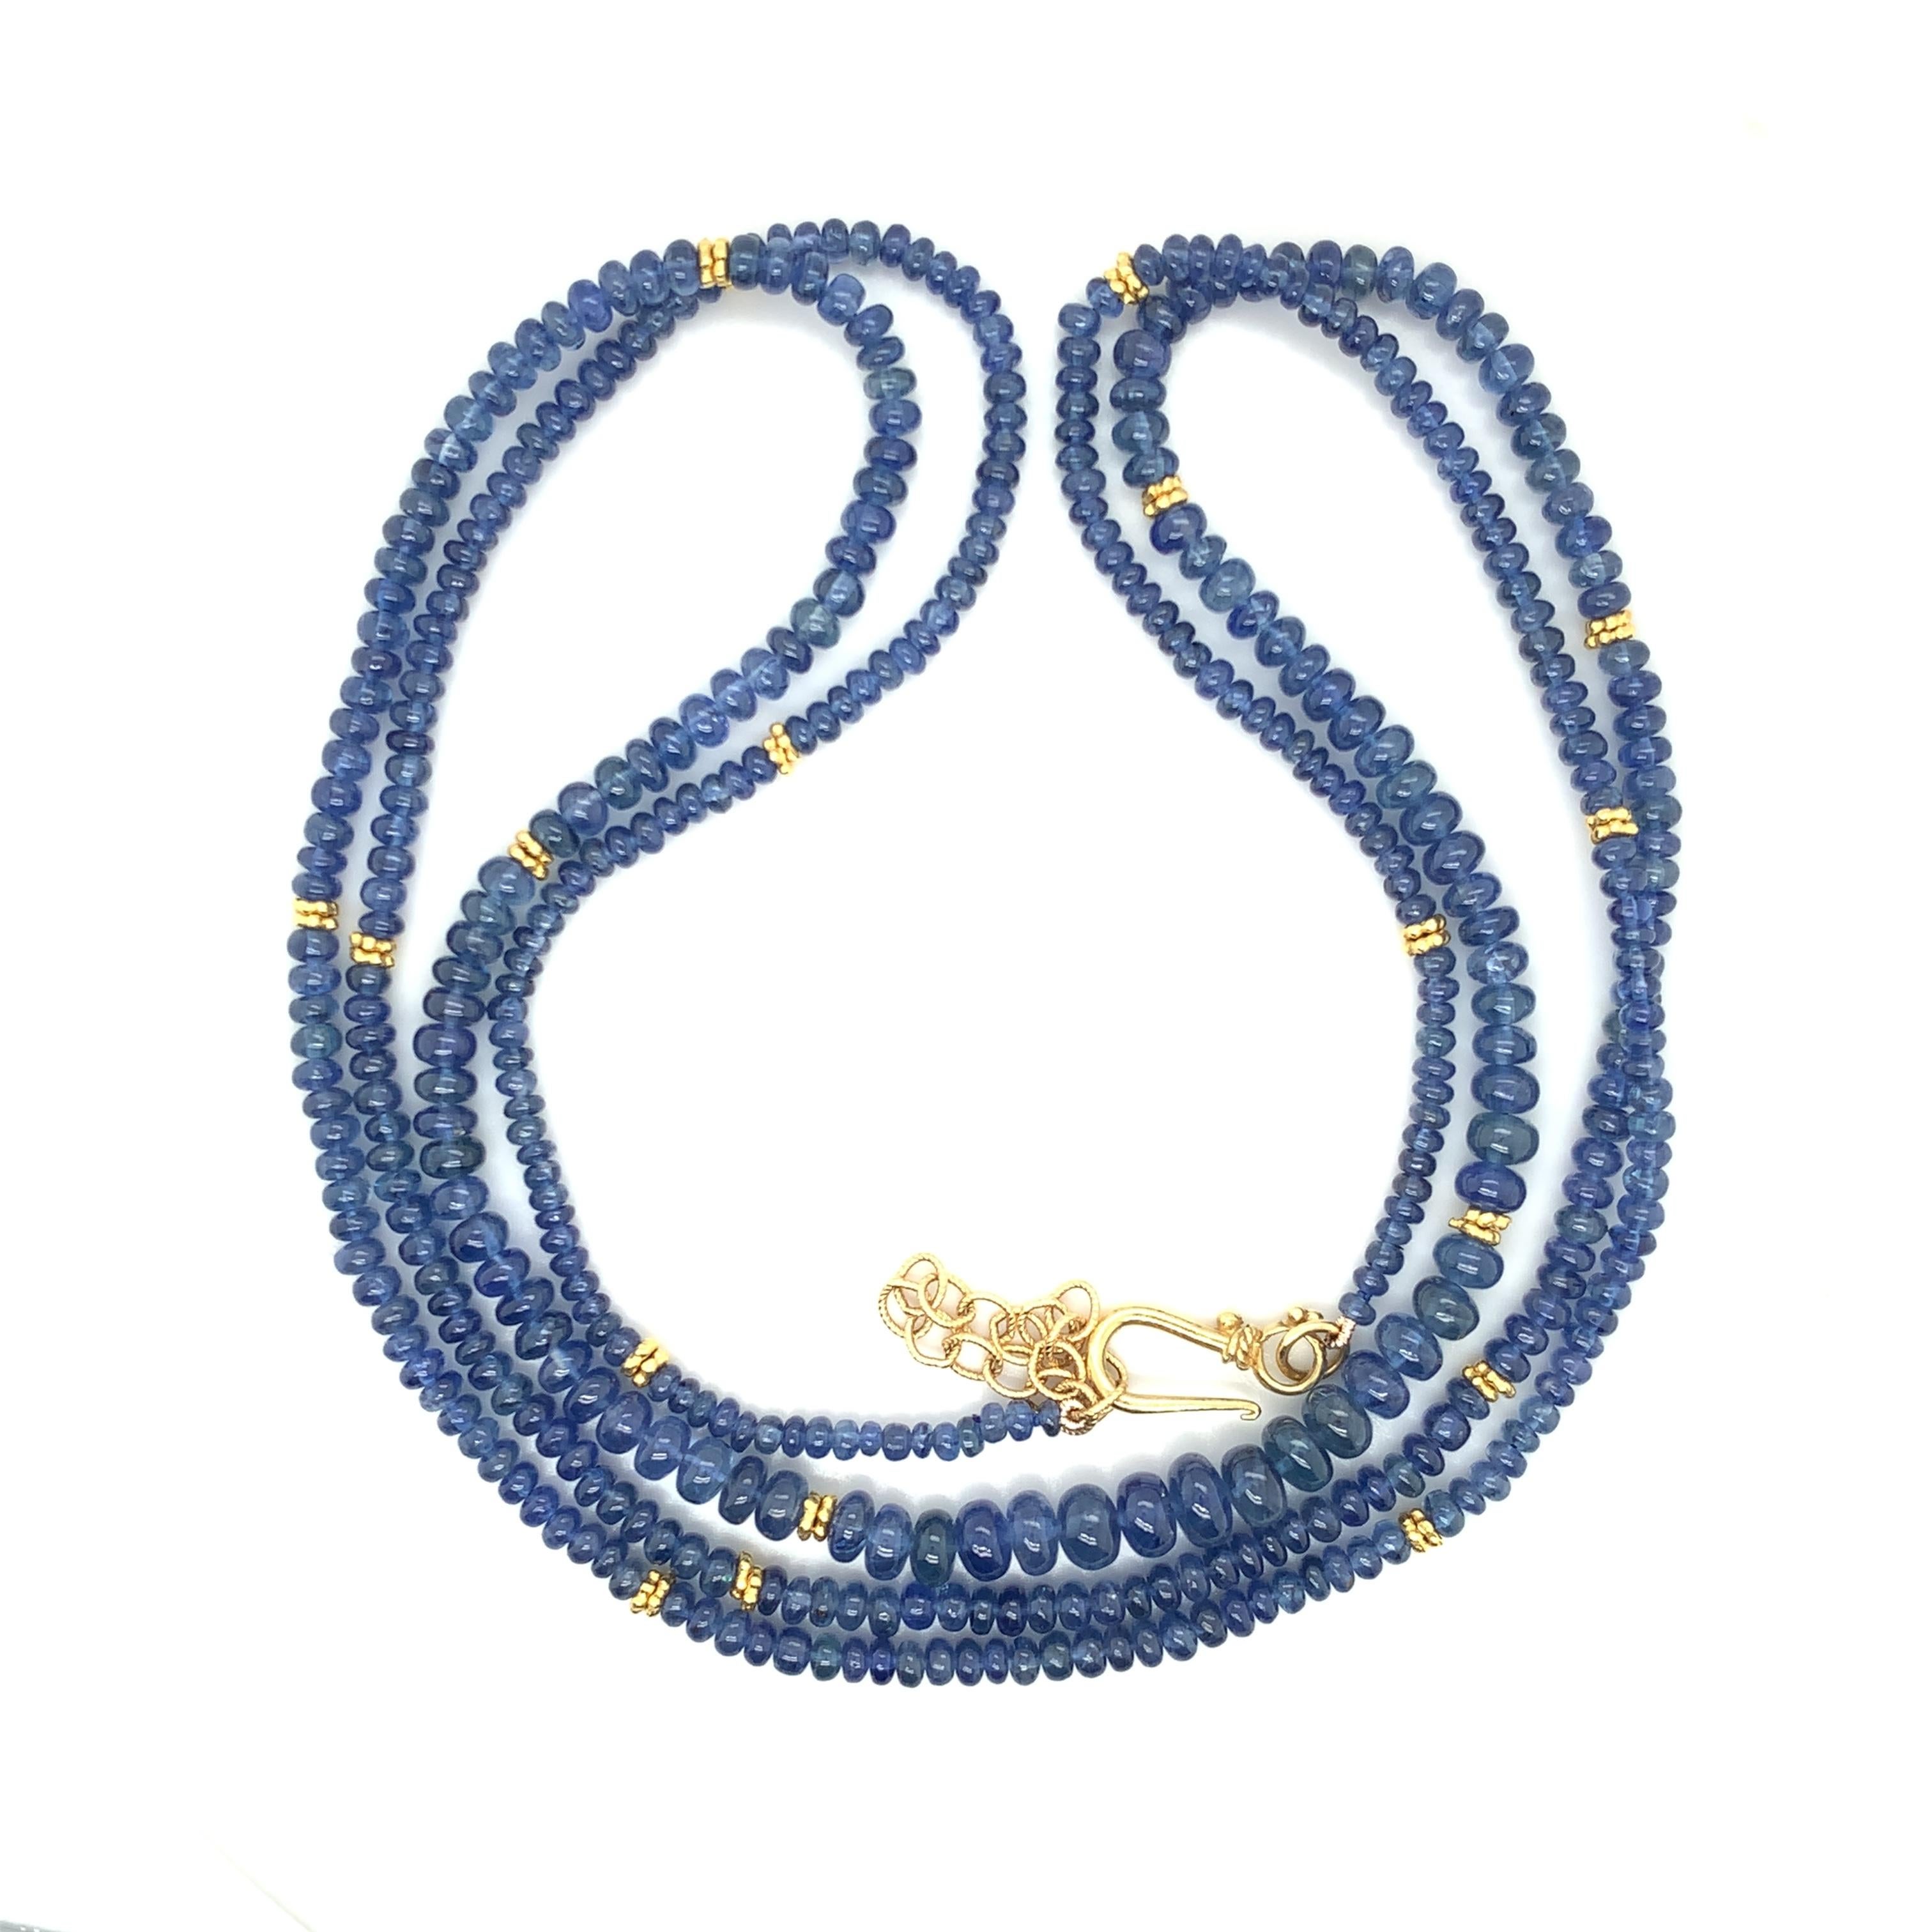 Artisan Blue Sapphire Bead Single Strand Necklace, Yellow Gold Spacers and Clasp